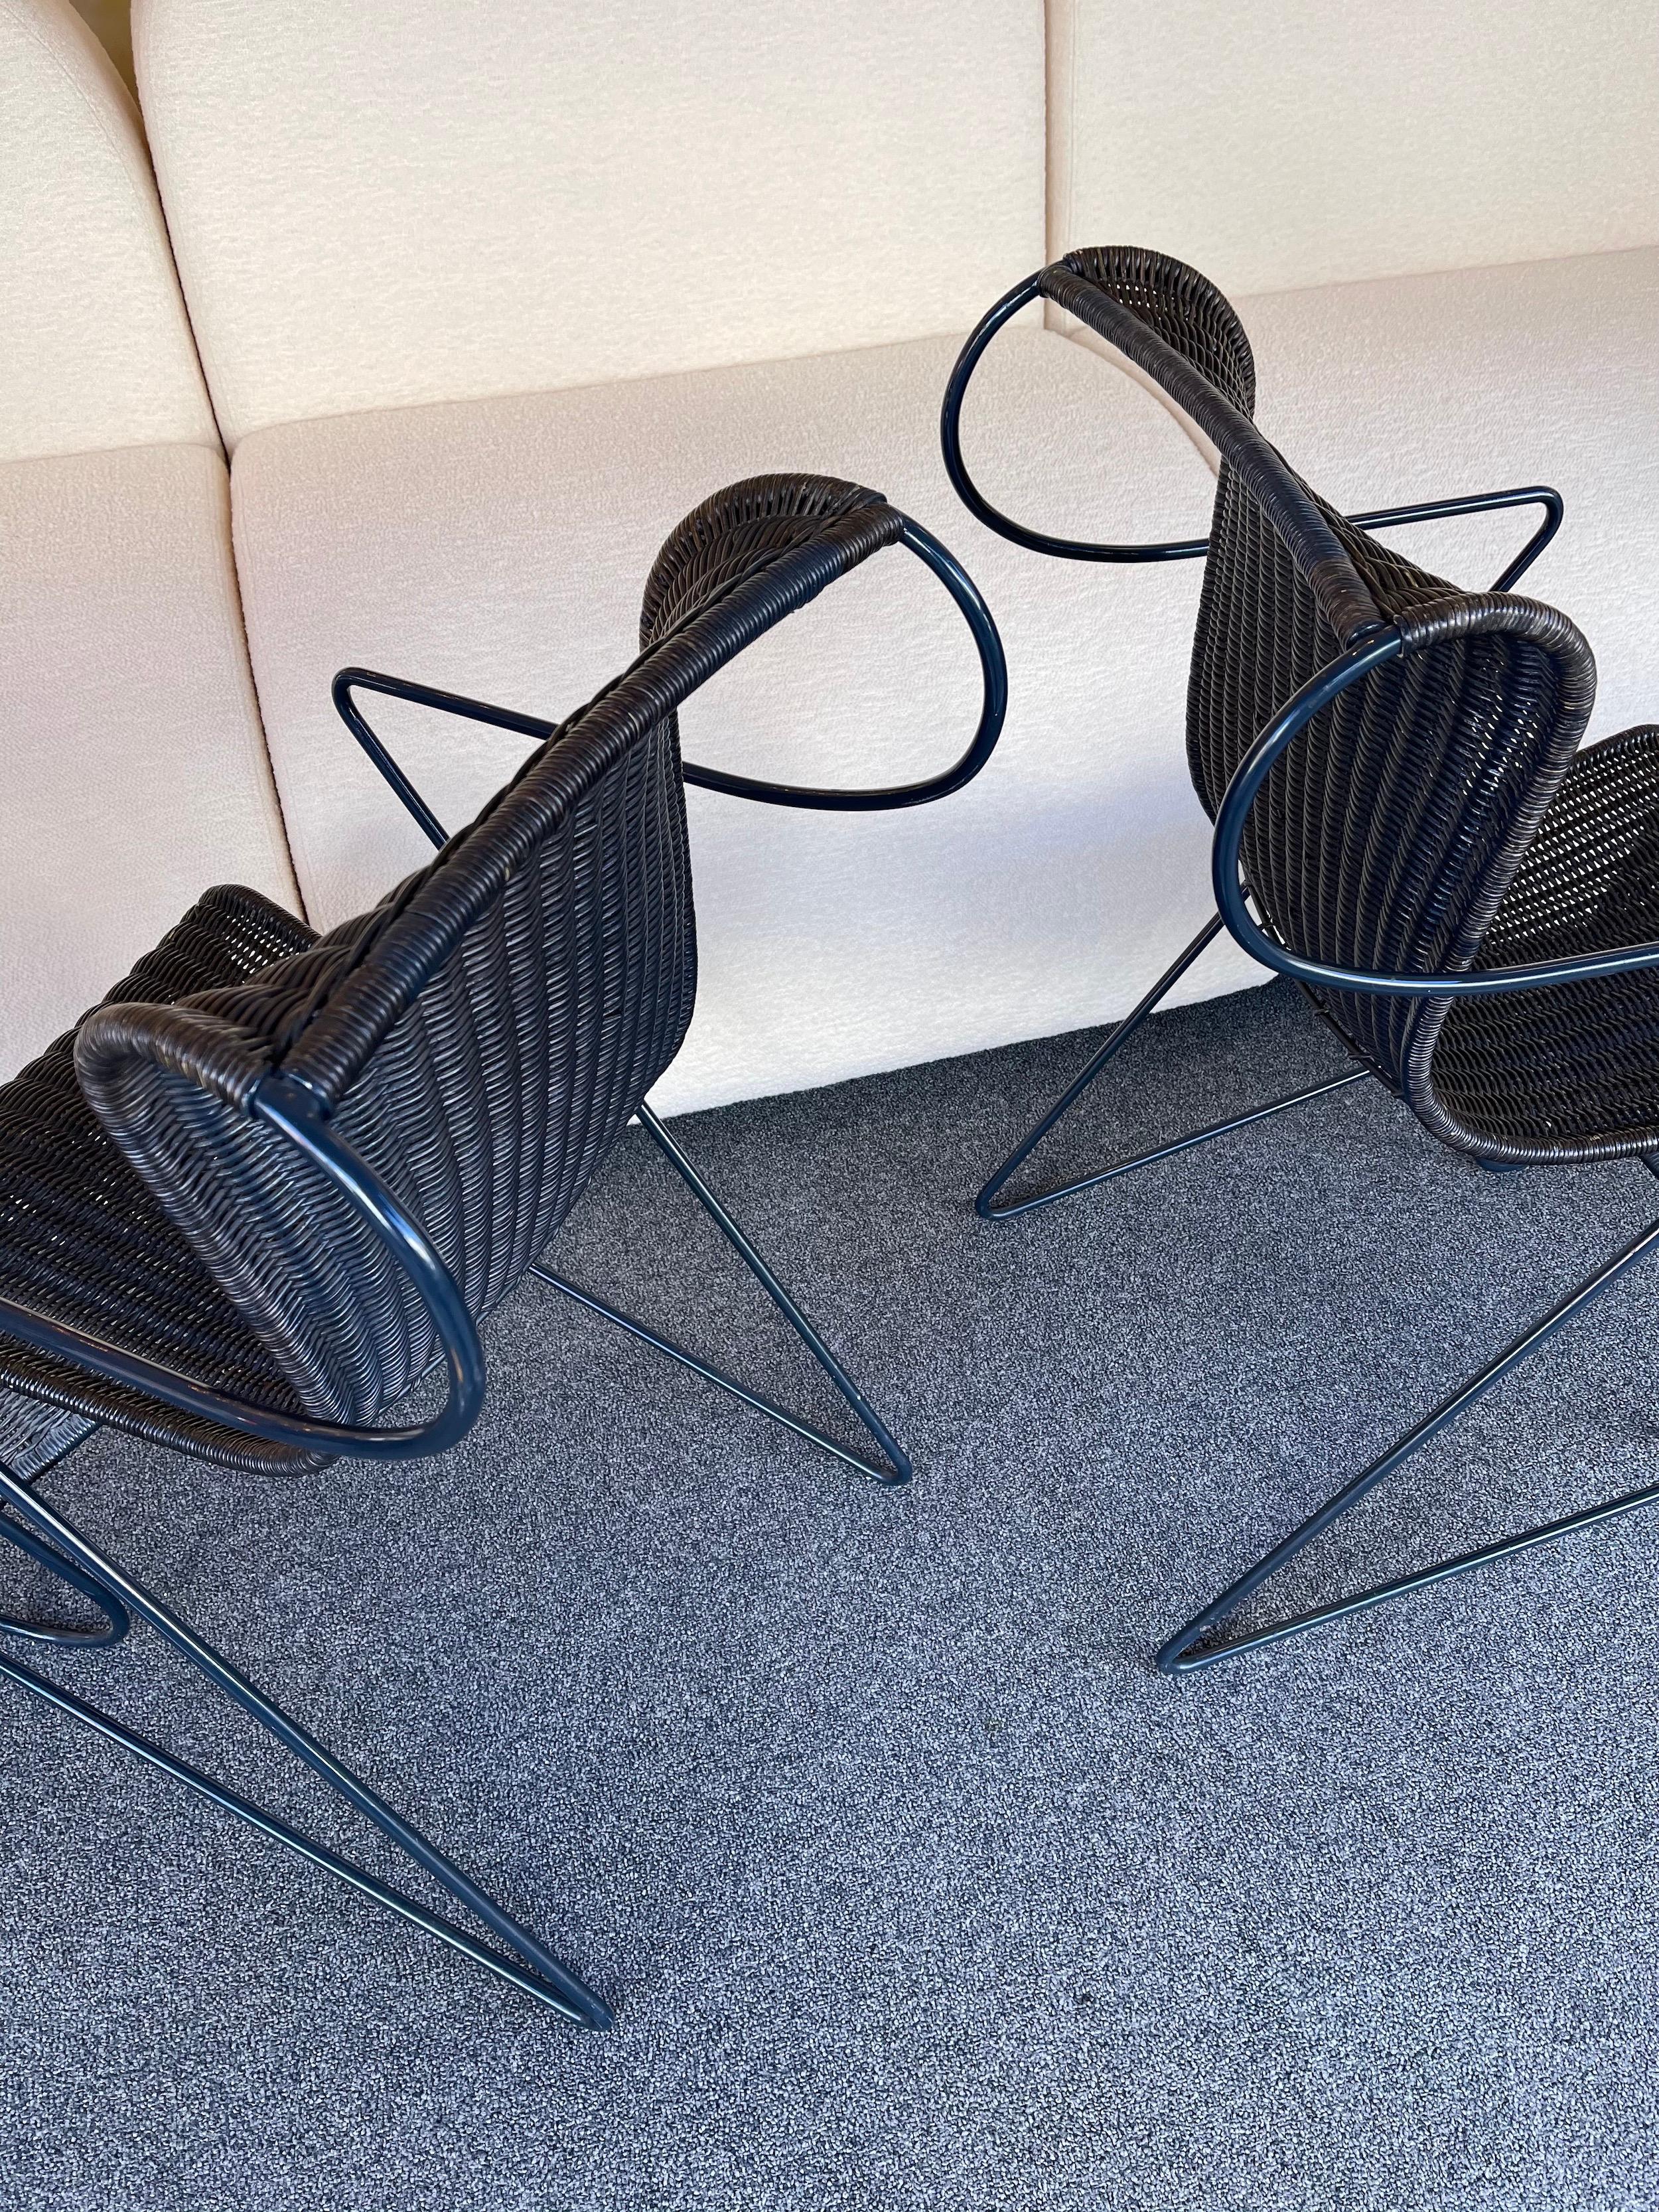 Set of 4 Chairs Zigo Metal Rattan by Ron Arad for Driade, Italy, 1990s For Sale 3